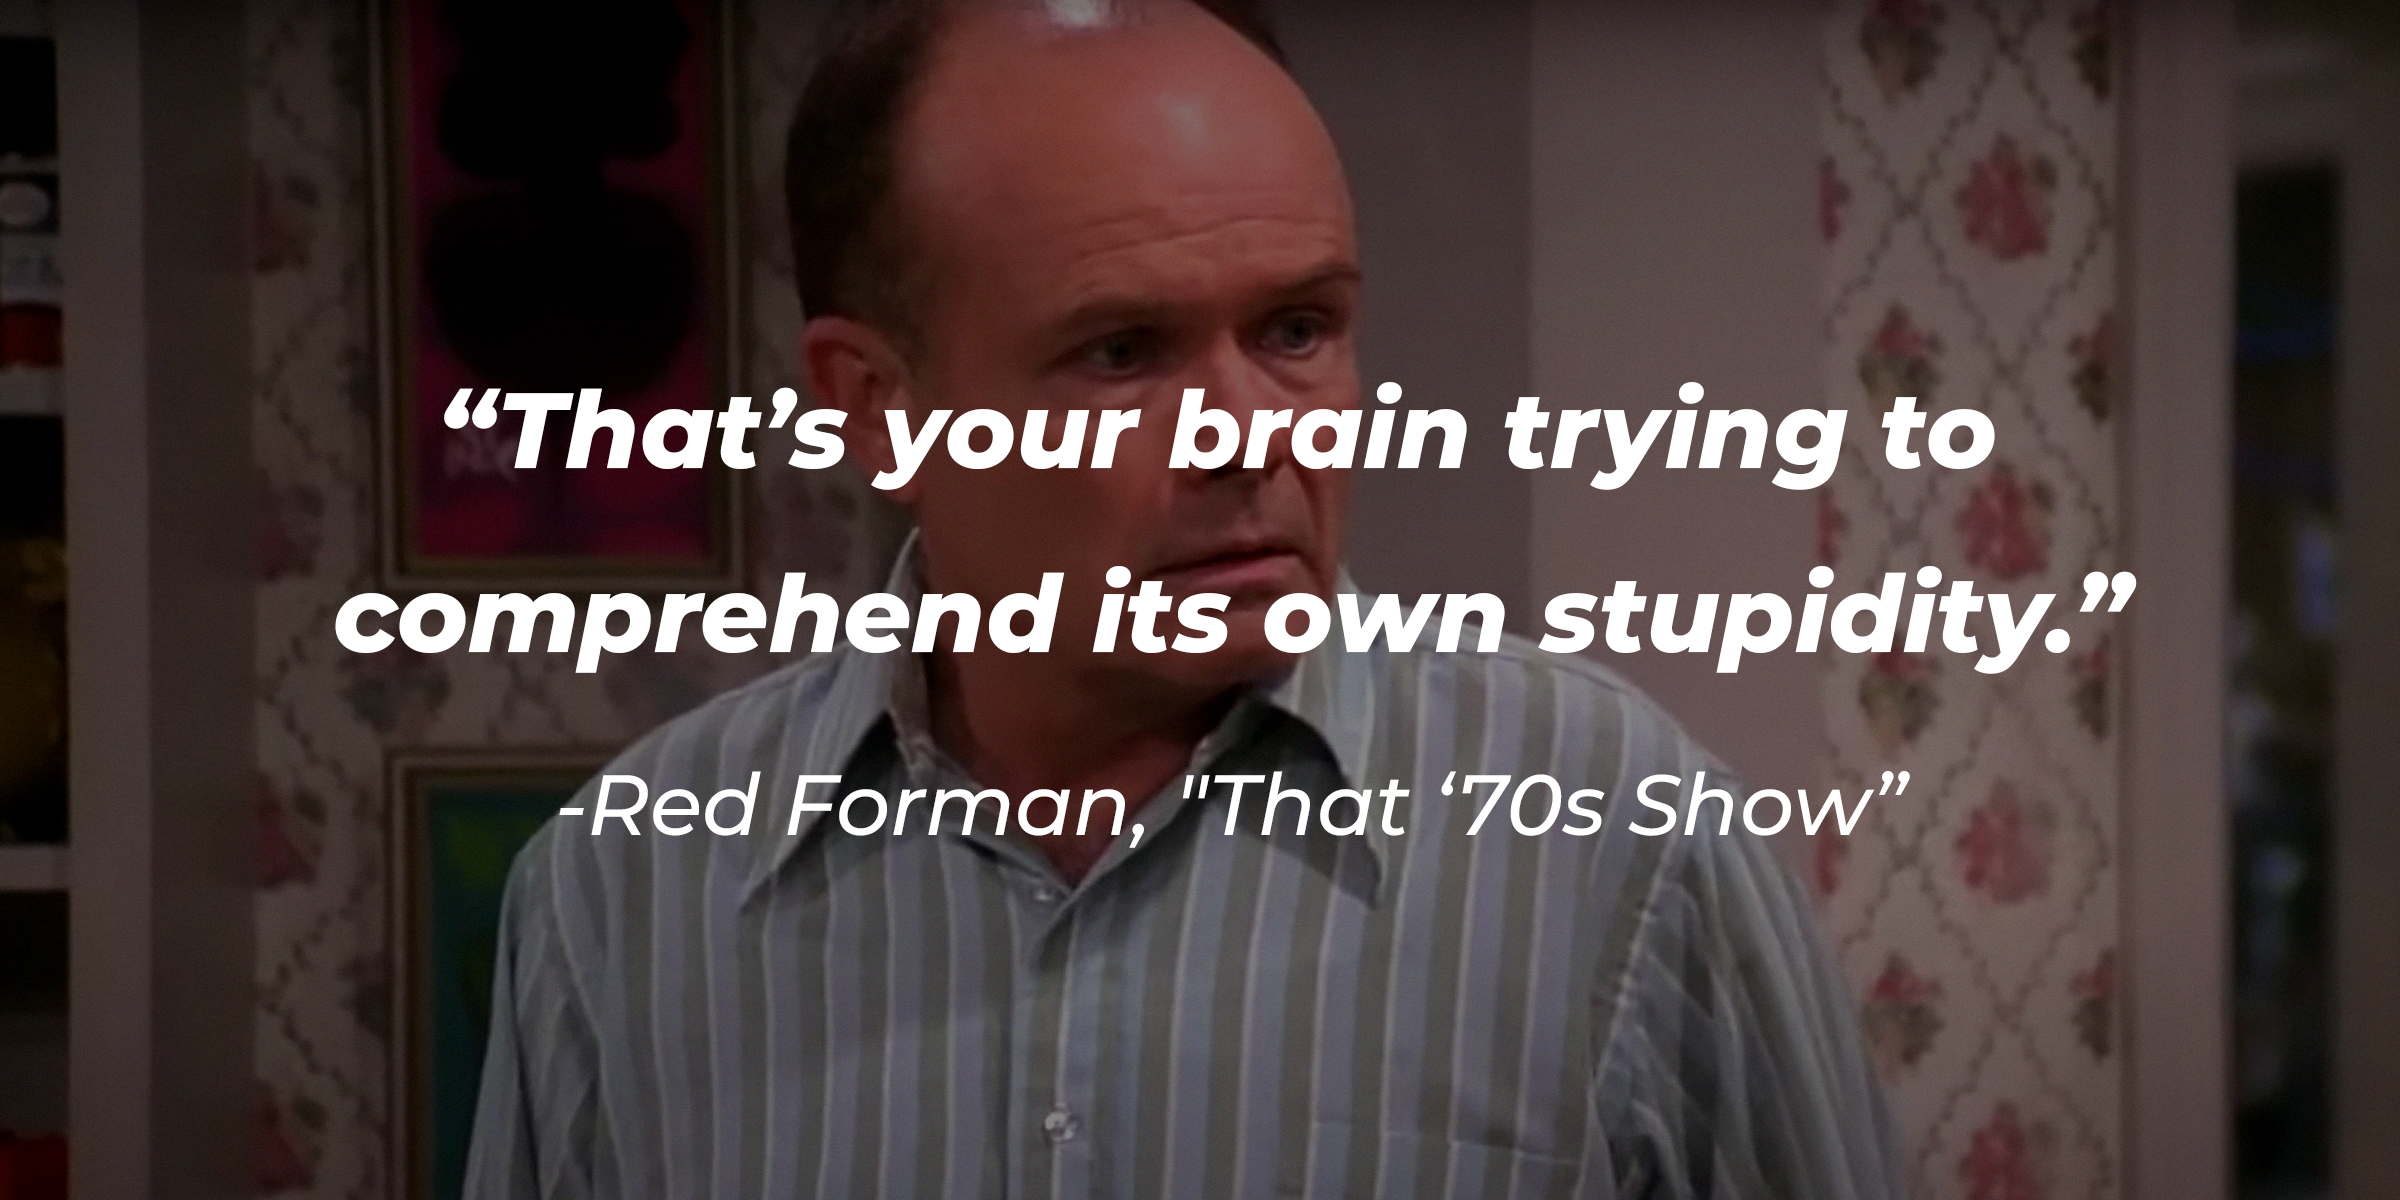 Red Forman with his quote on "That ''70s Show:" "That's your brain trying to comprehend its own stupidity." | Source: Facebook.com/That70sShowTv